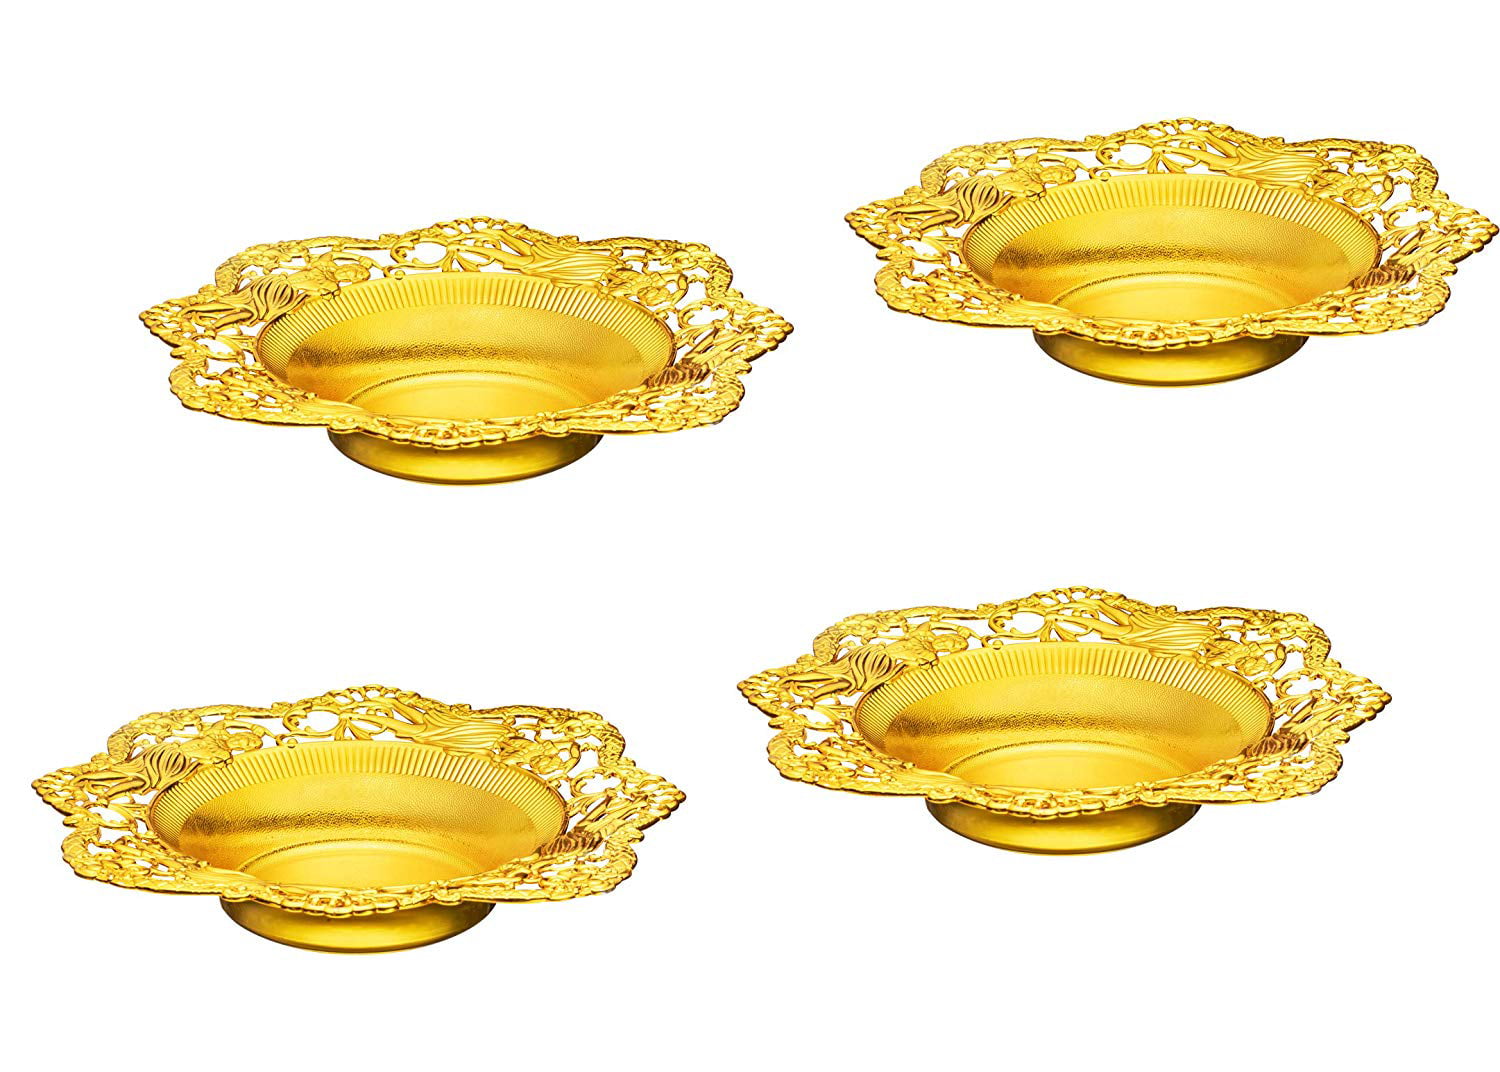 Impressive Creations Reusable Decorative Serving Dish – Plastic Candy Dish  with Elegant Gold Finish – Functional and Vintage Design